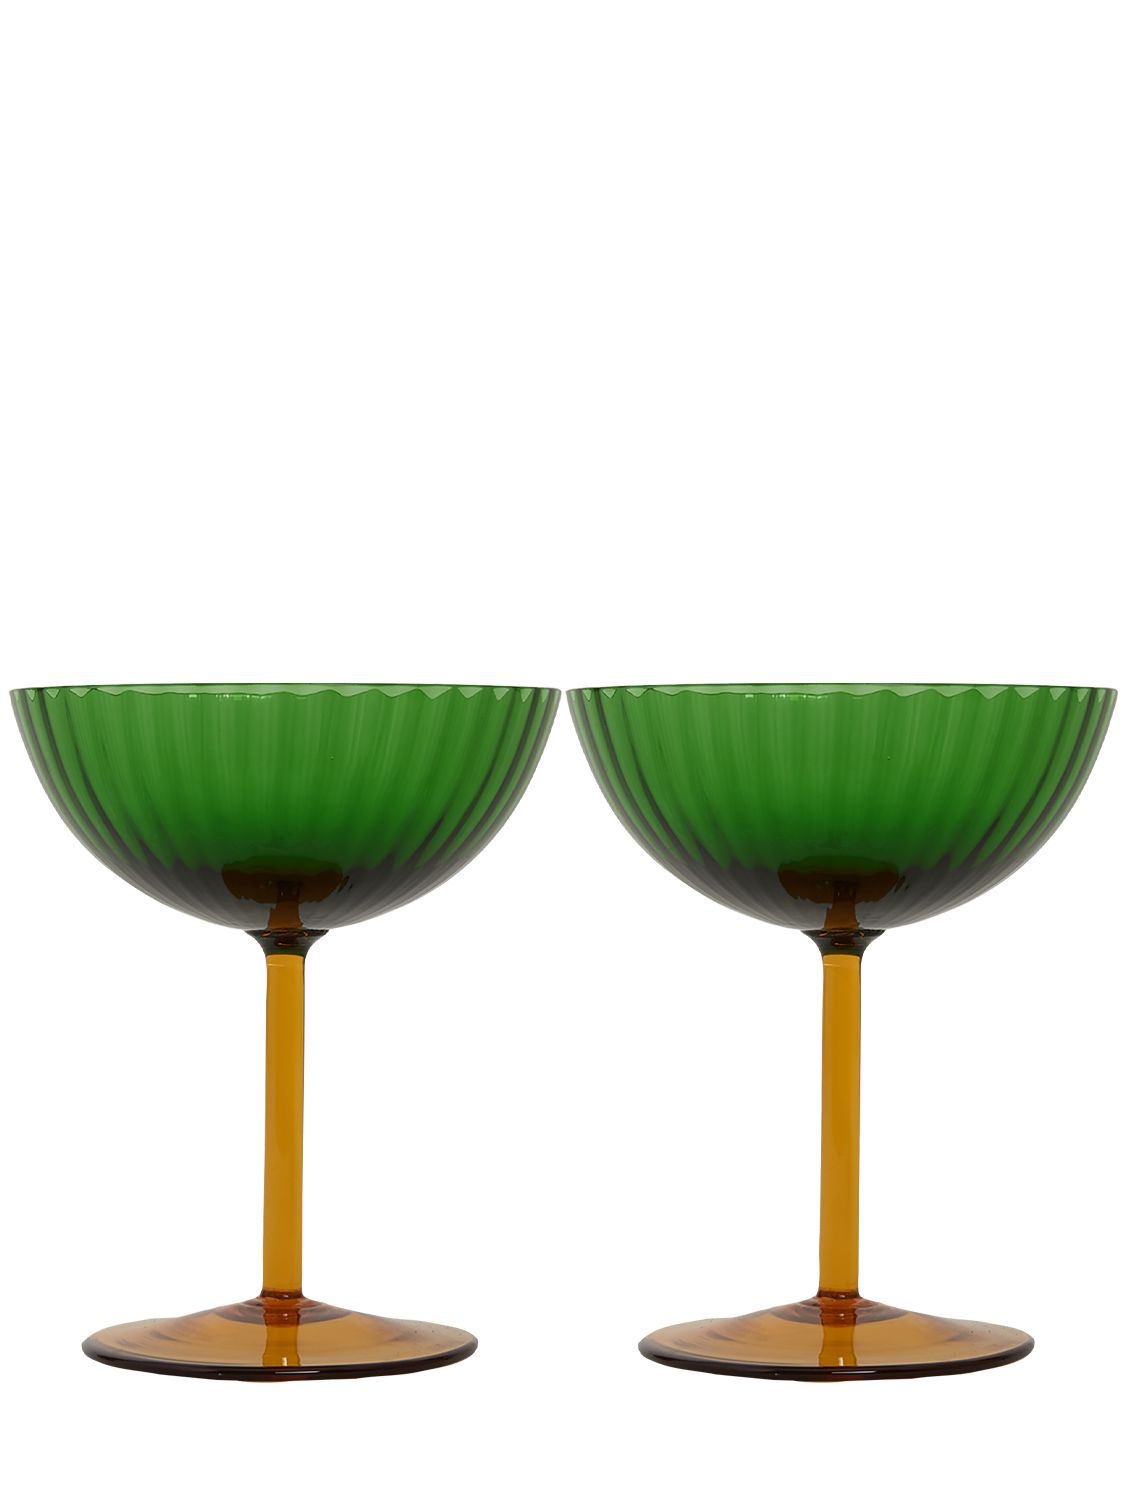 Image of Set Of 2 Salviati Champagne Coupes